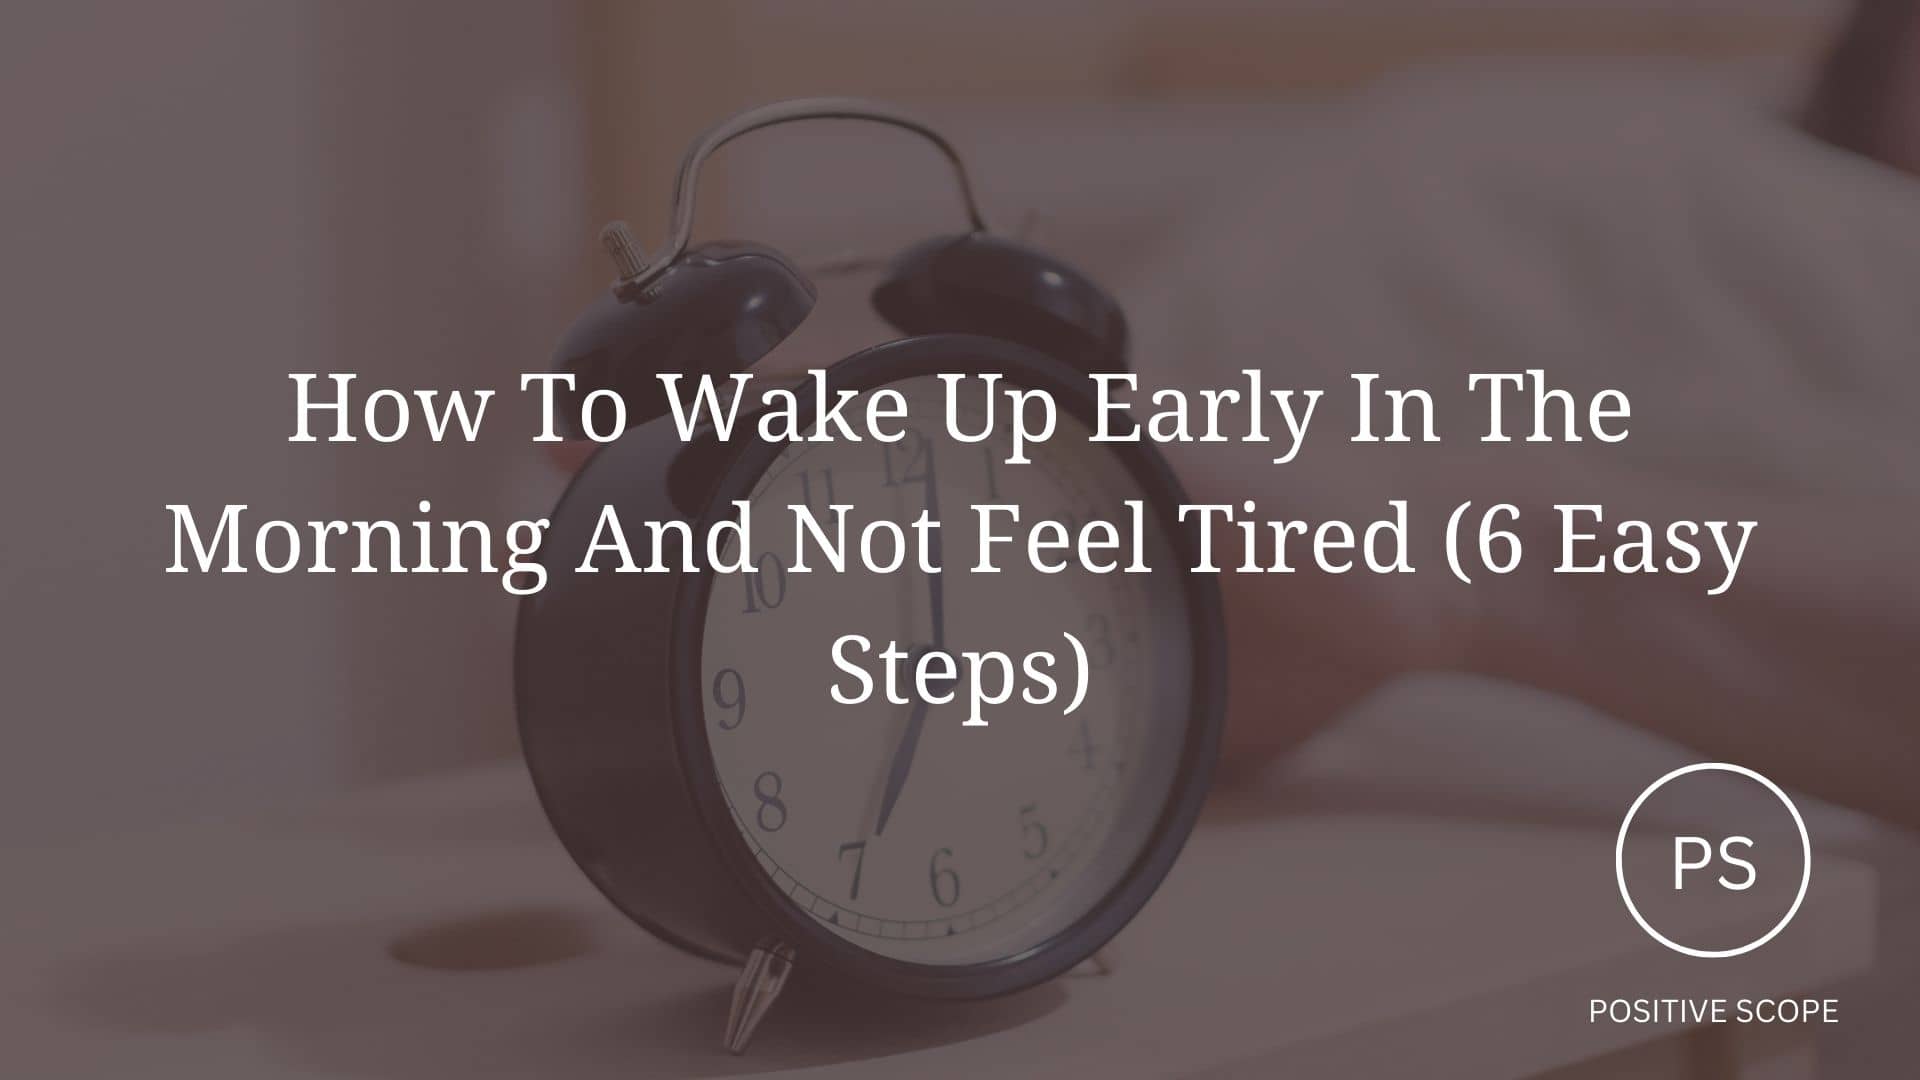 How To Wake Up Early In The Morning And Not Feel Tired (6 Easy Steps)